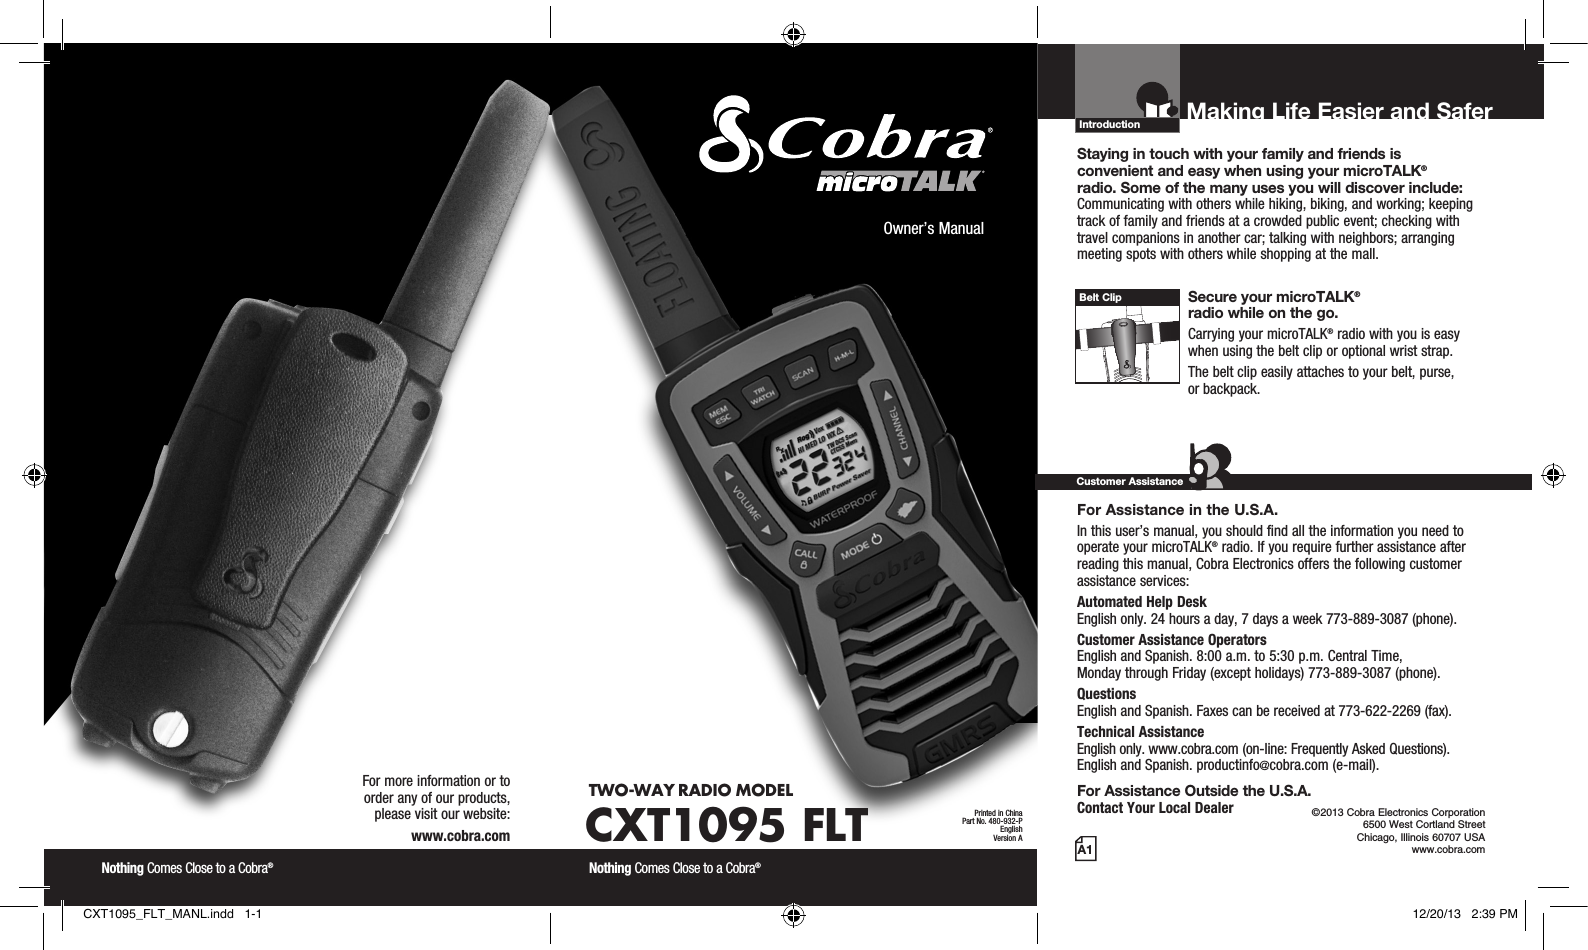 Introduction©2013 Cobra Electronics Corporation 6500 West Cortland Street Chicago, Illinois 60707 USAwww.cobra.comMaking Life Easier and Safer Staying in touch with your family and friends is  convenient and easy when using your microTALK®  radio. Some of the many uses you will discover include:Communicating with others while hiking, biking, and working; keeping track of family and friends at a crowded public event; checking with travel companions in another car; talking with neighbors; arranging meeting spots with others while shopping at the mall. Secure your microTALK®  radio while on the go.Carrying your microTALK® radio with you is easy when using the belt clip or optional wrist strap. The belt clip easily attaches to your belt, purse,  or backpack.For Assistance in the U.S.A. In this user’s manual, you should find all the information you need to operate your microTALK® radio. If you require further assistance after reading this manual, Cobra Electronics offers the following customer assistance services:Automated Help Desk  English only. 24 hours a day, 7 days a week 773-889-3087 (phone). Customer Assistance Operators  English and Spanish. 8:00 a.m. to 5:30 p.m. Central Time,  Monday through Friday (except holidays) 773-889-3087 (phone). Questions  English and Spanish. Faxes can be received at 773-622-2269 (fax). Technical Assistance  English only. www.cobra.com (on-line: Frequently Asked Questions).  English and Spanish. productinfo@cobra.com (e-mail).For Assistance Outside the U.S.A. Contact Your Local DealerCustomer AssistanceA1Owner’s ManualNothing Comes Close to a Cobra® Nothing Comes Close to a Cobra® For more information or to  order any of our products,  please visit our website:www.cobra.comBelt ClipPrinted in ChinaPart No. 480-932-PEnglishVersion ATWO-WAY RADIO  MODEL CXT1095 FLTCXT1095_FLT_MANL.indd   1-1 12/20/13   2:39 PM